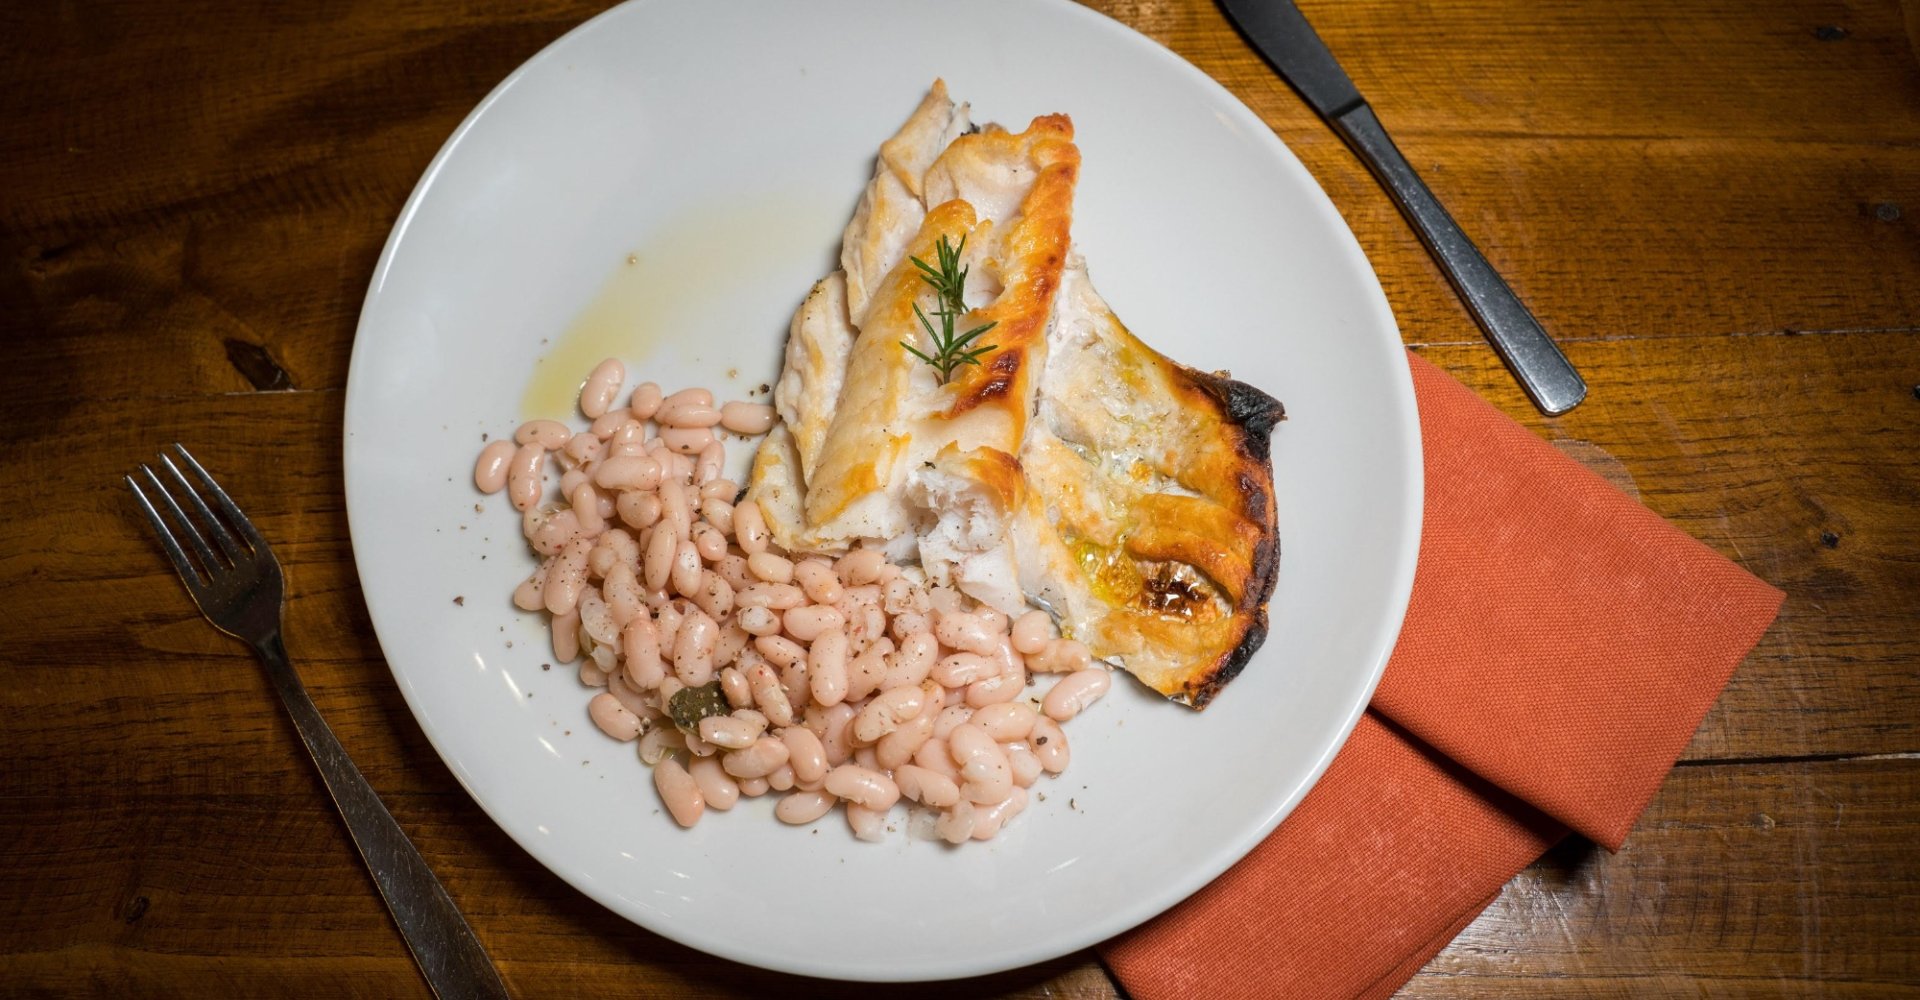 Sorana beans with grilled cod fish